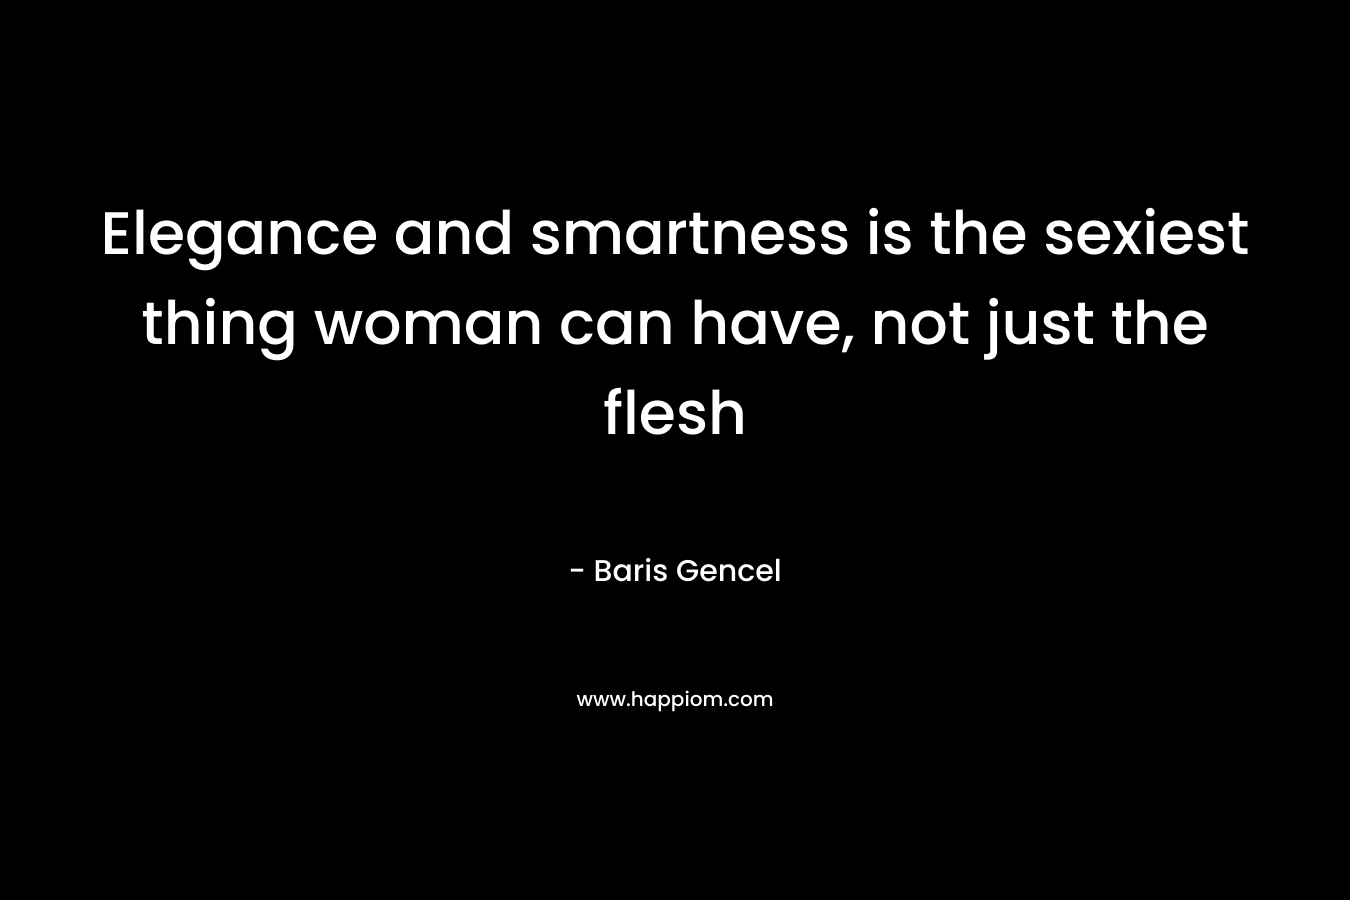 Elegance and smartness is the sexiest thing woman can have, not just the flesh